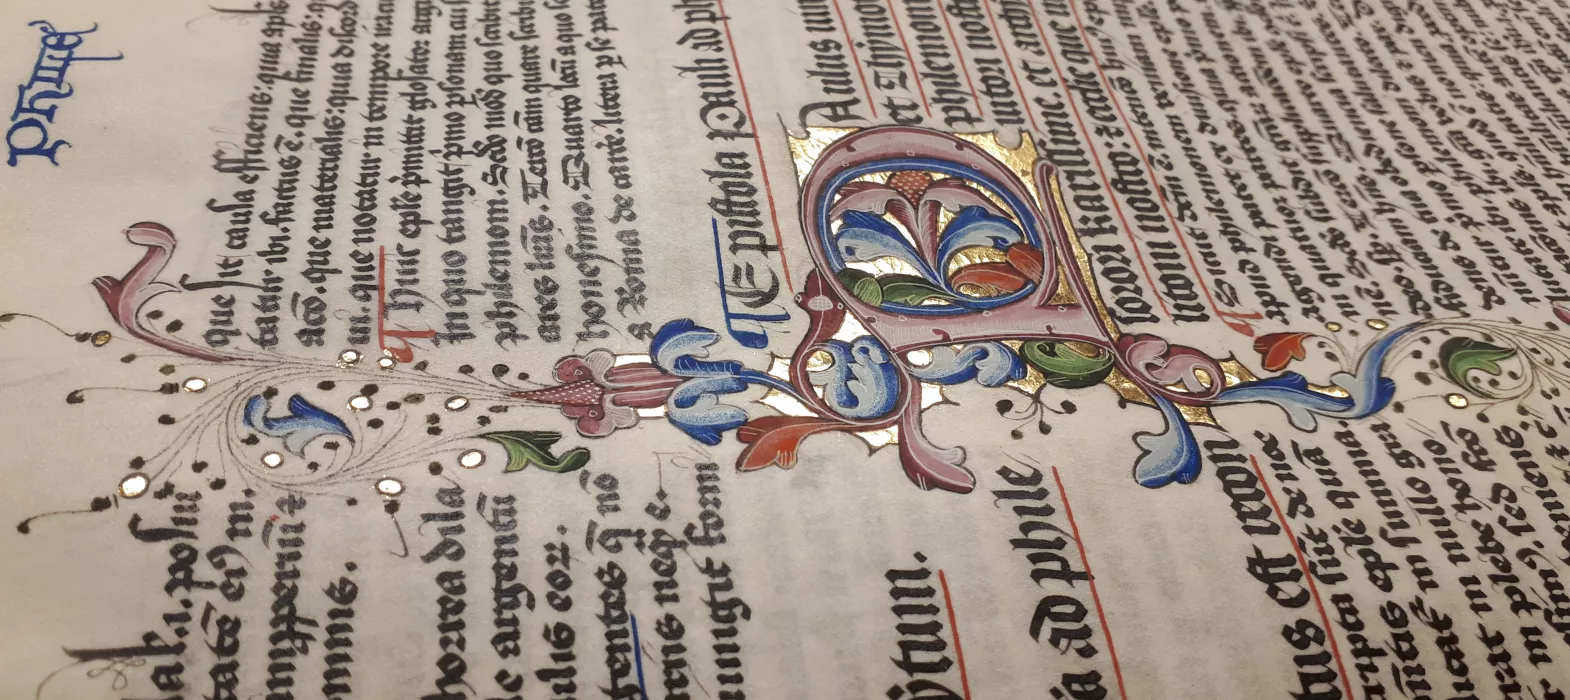 MS 61, New College Library, Oxford